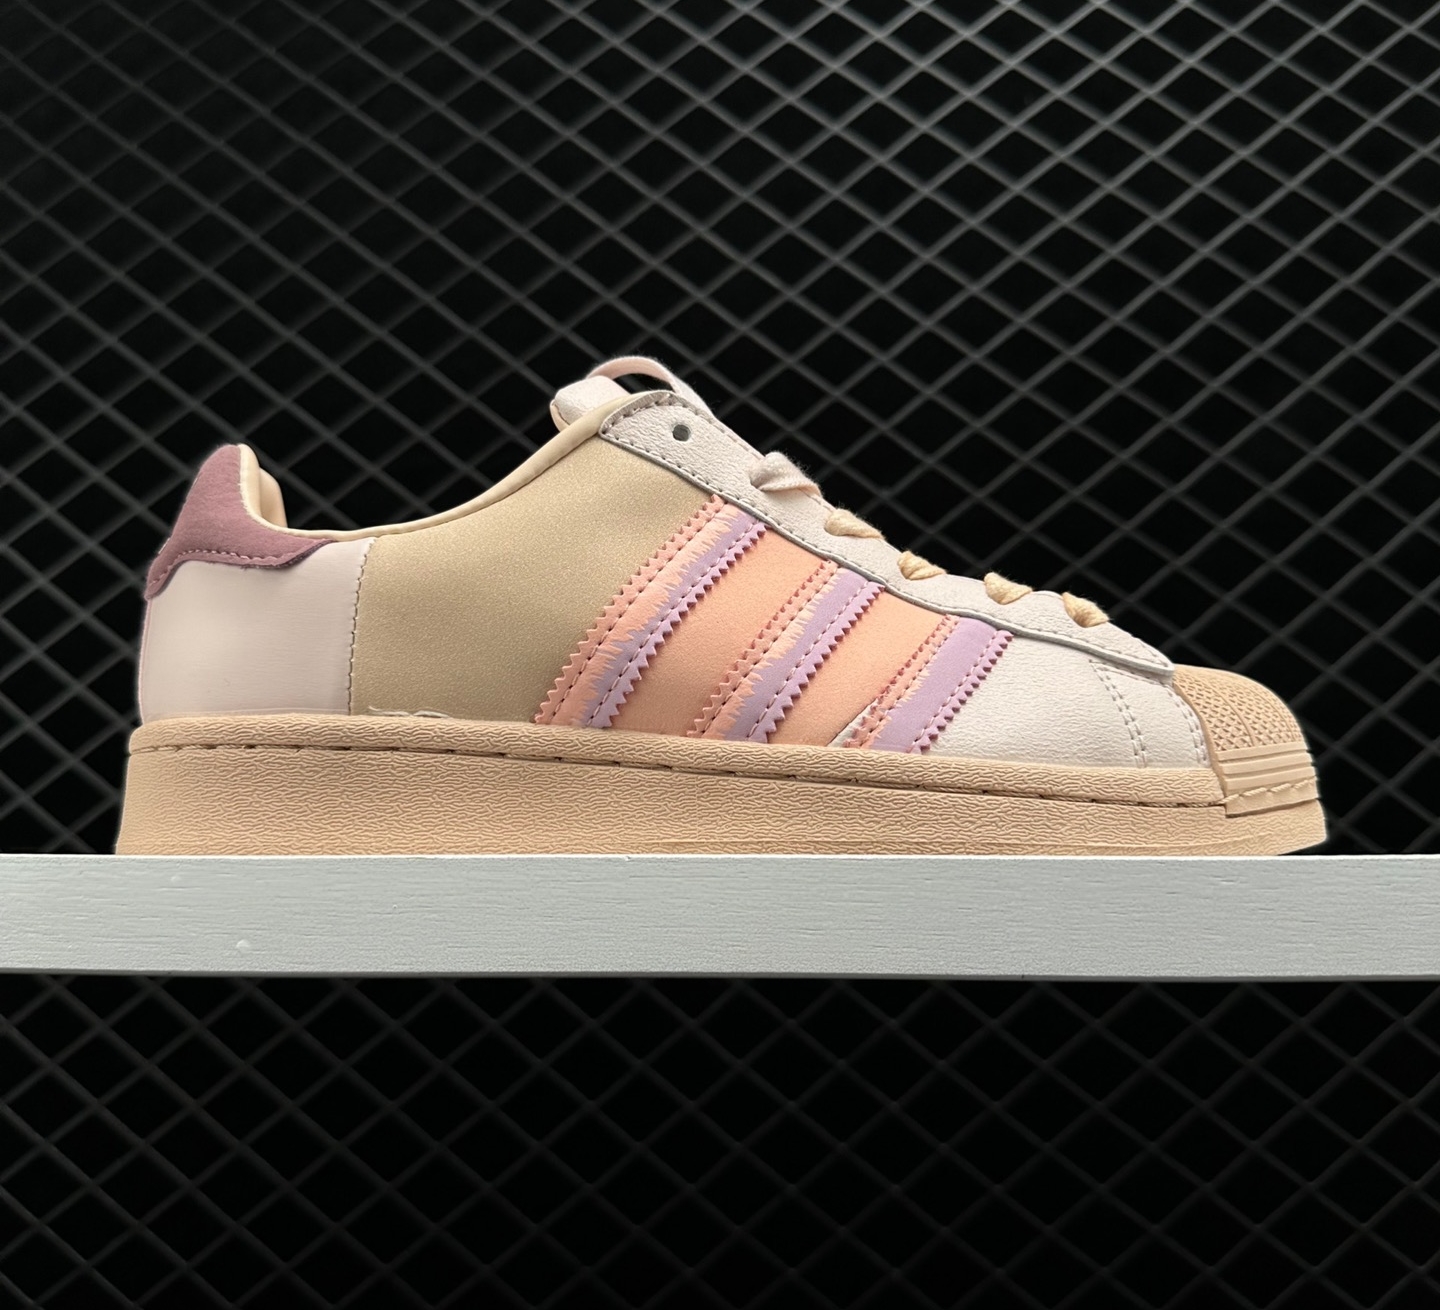 Adidas Superstar Pink H03676 - Stylish and Classic Sneaker